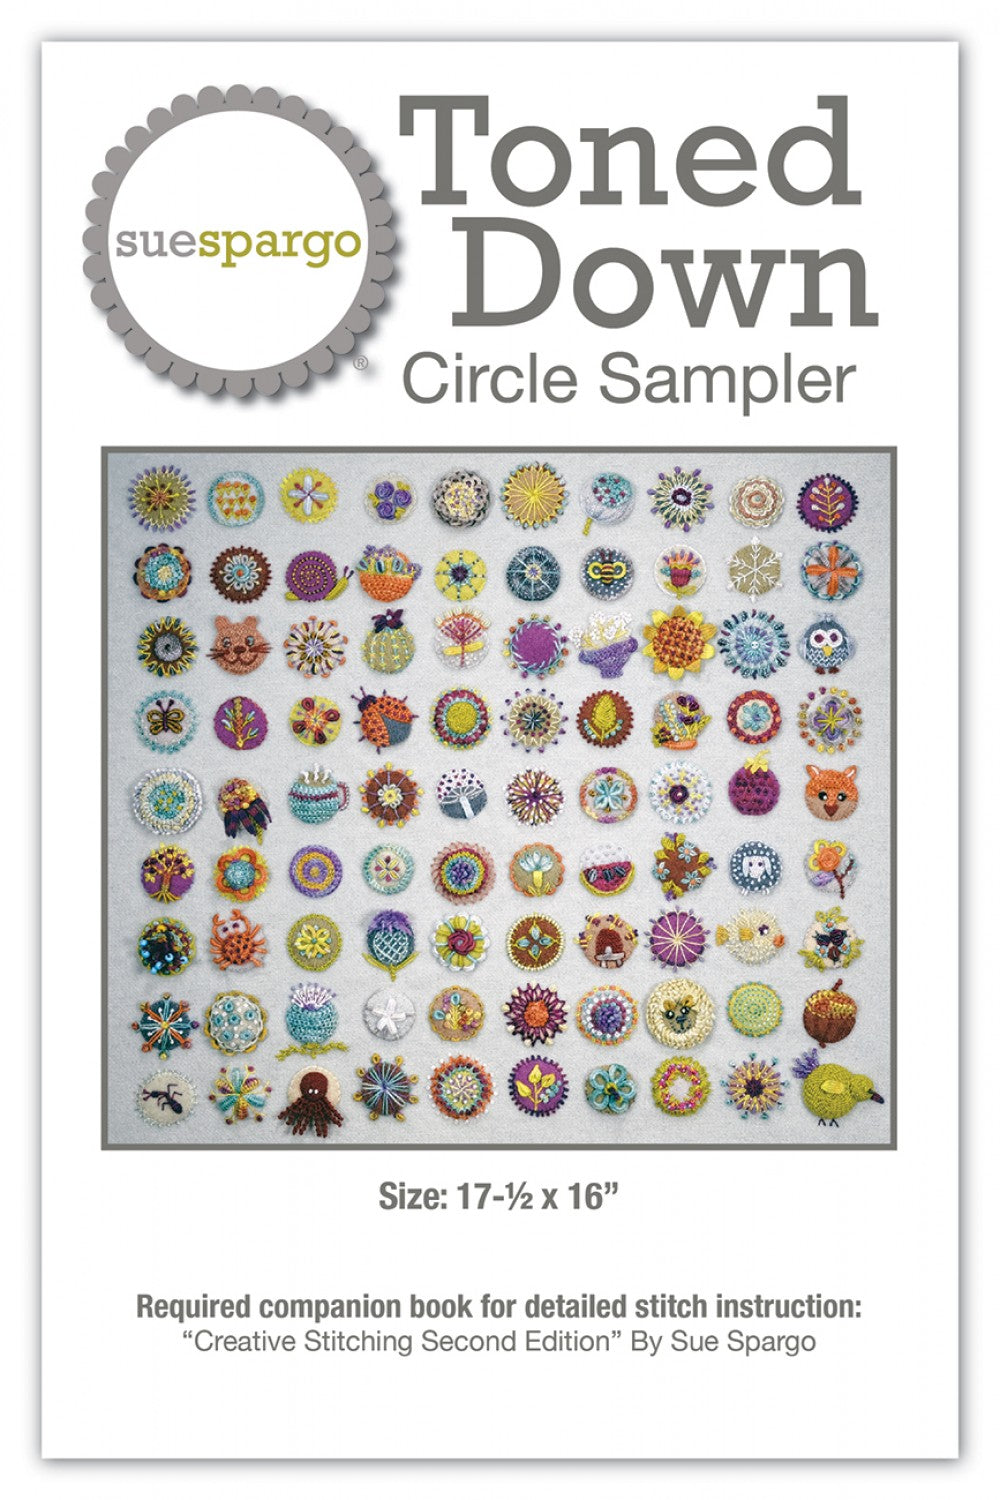 Toned Down Circle Sampler - Applique, Embroidery, and Sewing Pattern by Sue Spargo of Folk Art Quilts